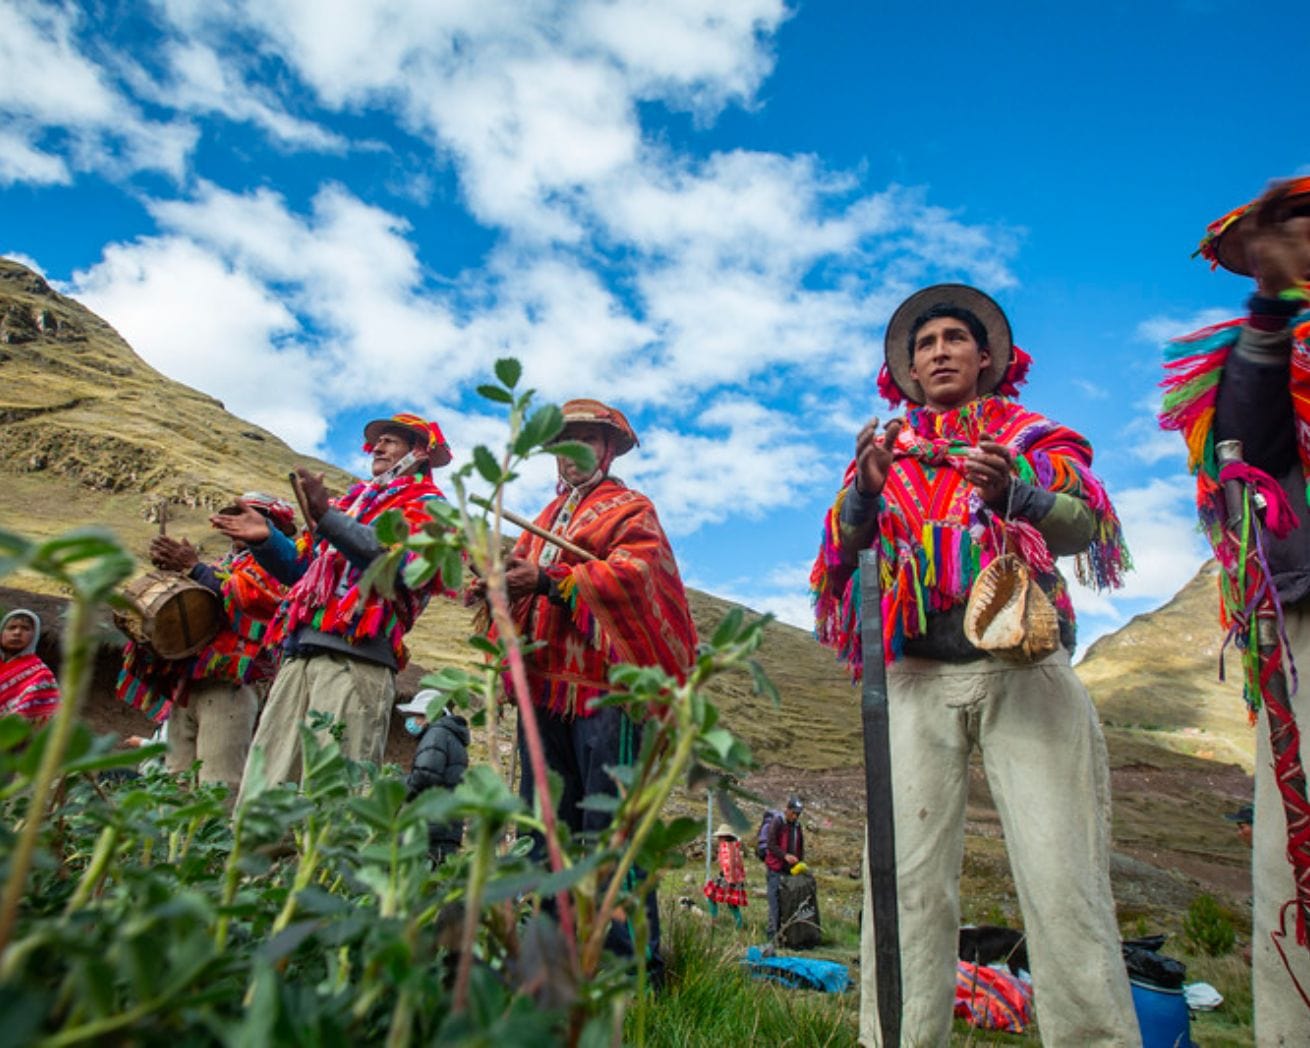 Group of people in the Andes